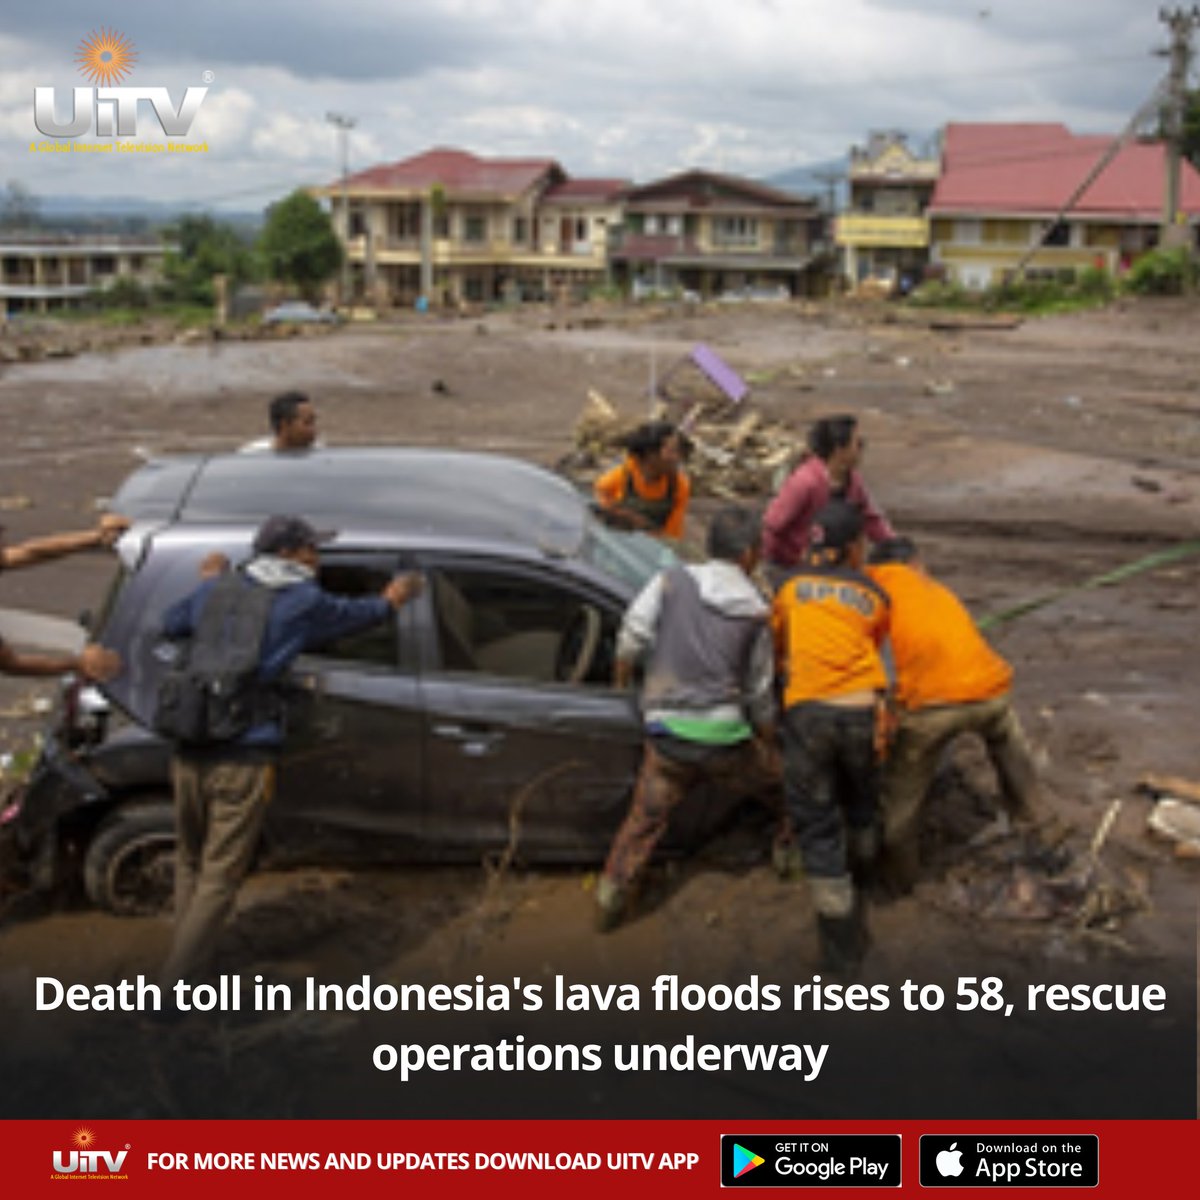 Our hearts go out to the victims of Indonesia's devastating lava floods. 😔 The death toll has risen to 58, and rescue operations are underway to save lives. 🕊️ #IndonesiaFloods #PrayForIndonesia #RescueOperations 🇮🇩❤️